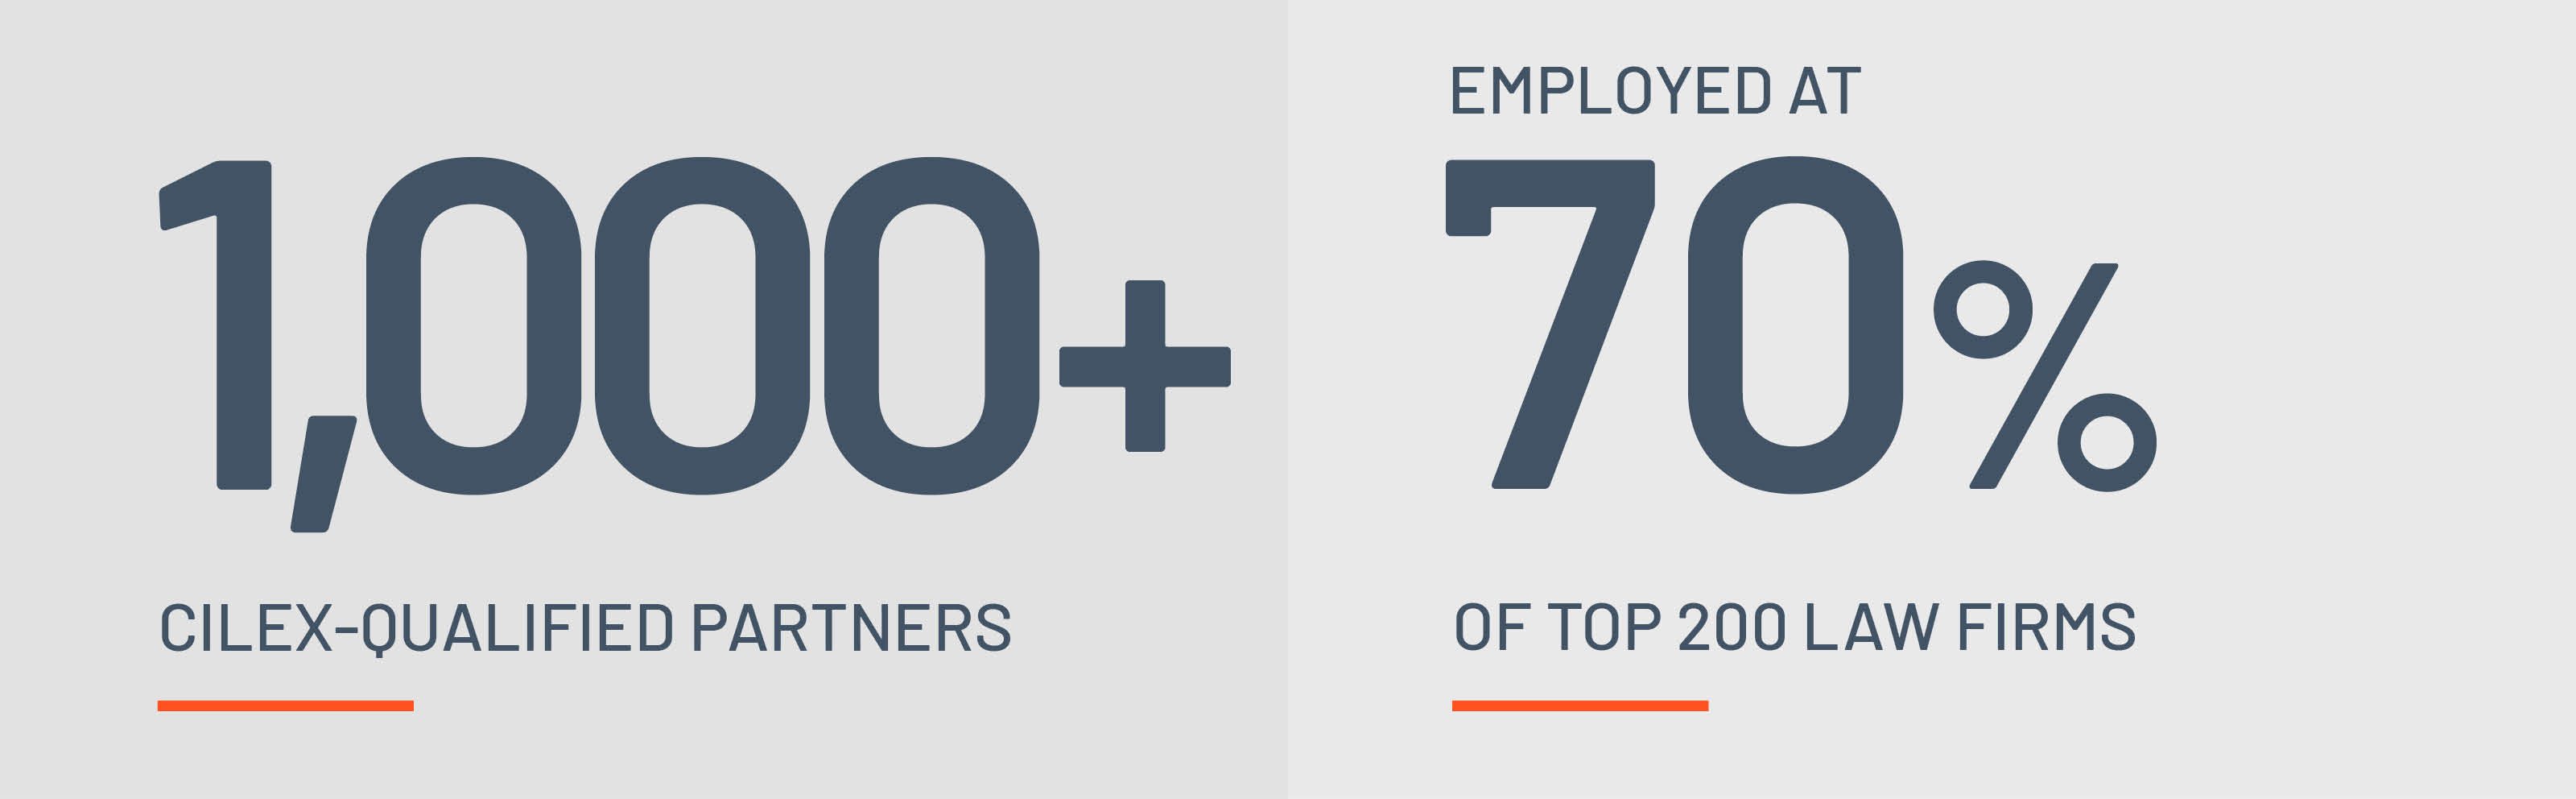 Over 1000 CILEX-qualified partners Employed at 70% of top 200 law firms